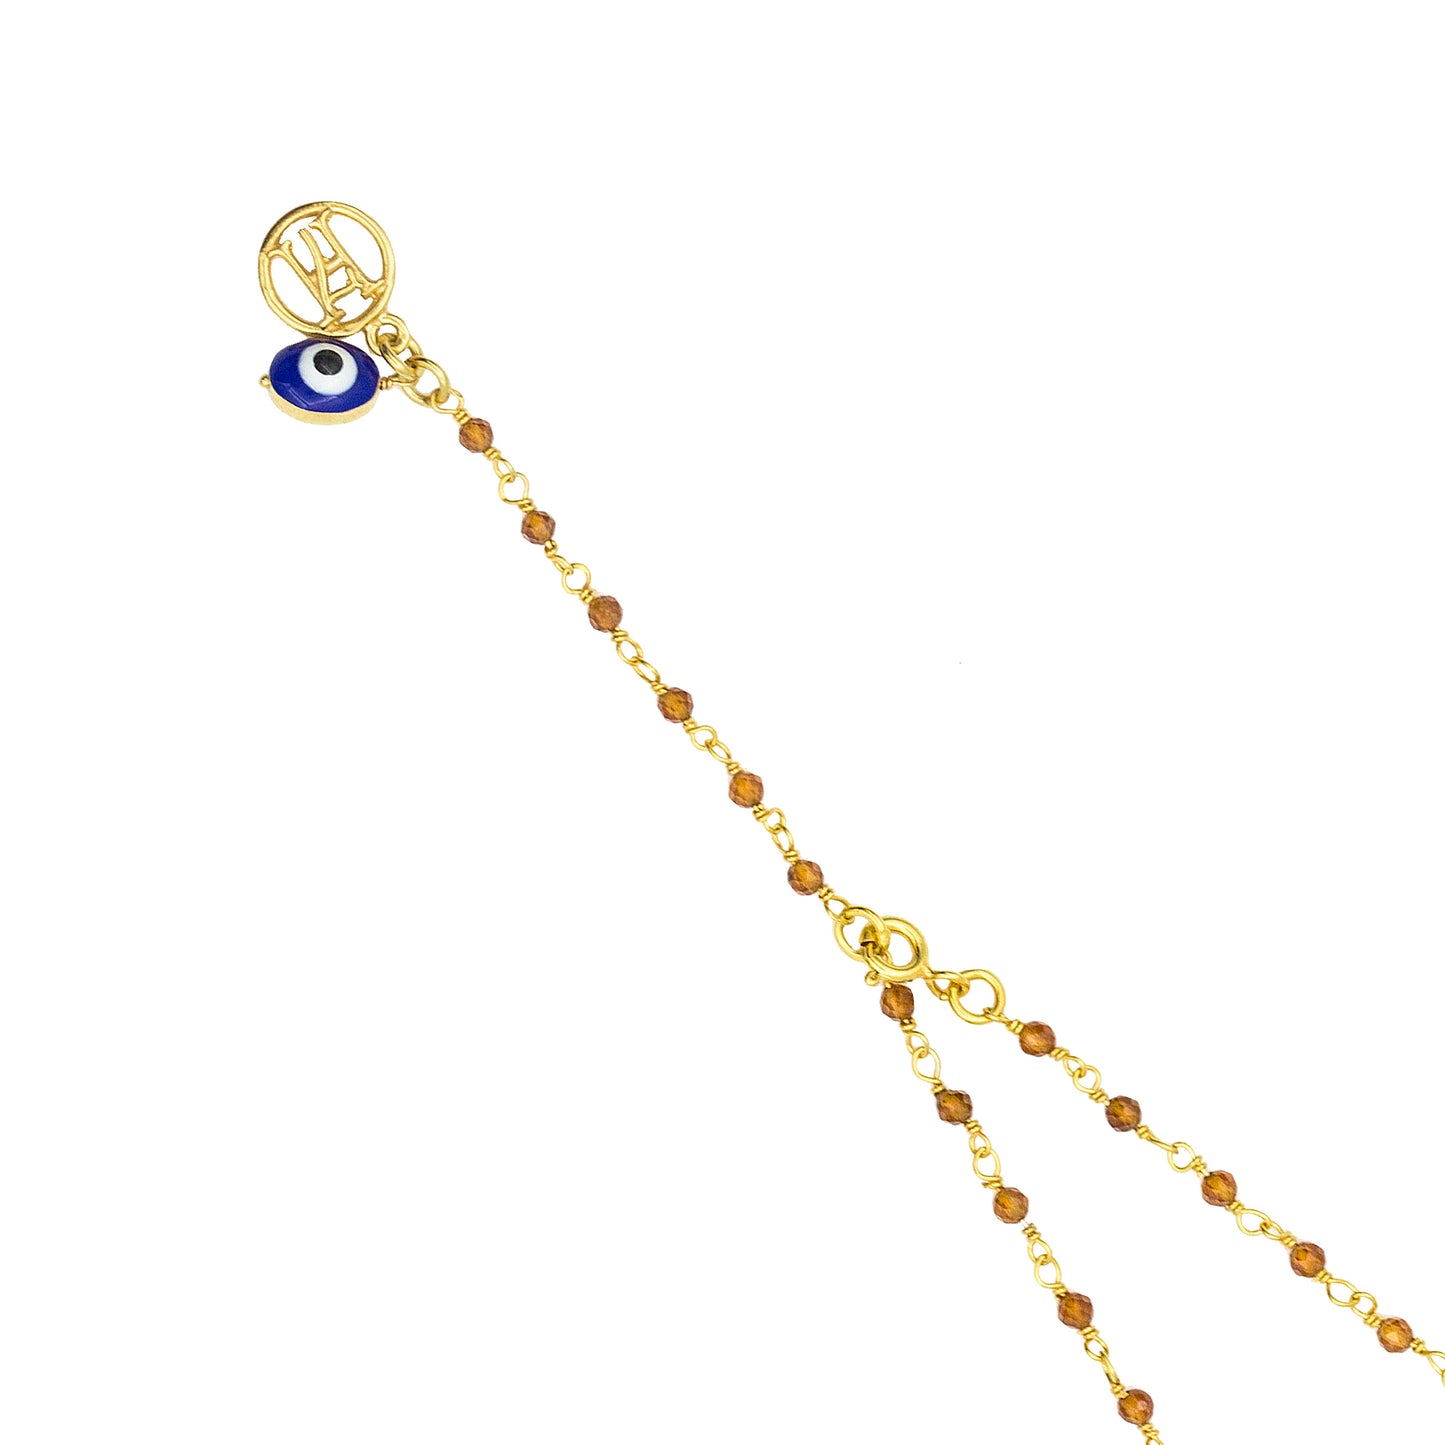 Sun Charm Gemstone Vermeil Necklace for Positivity & Happiness